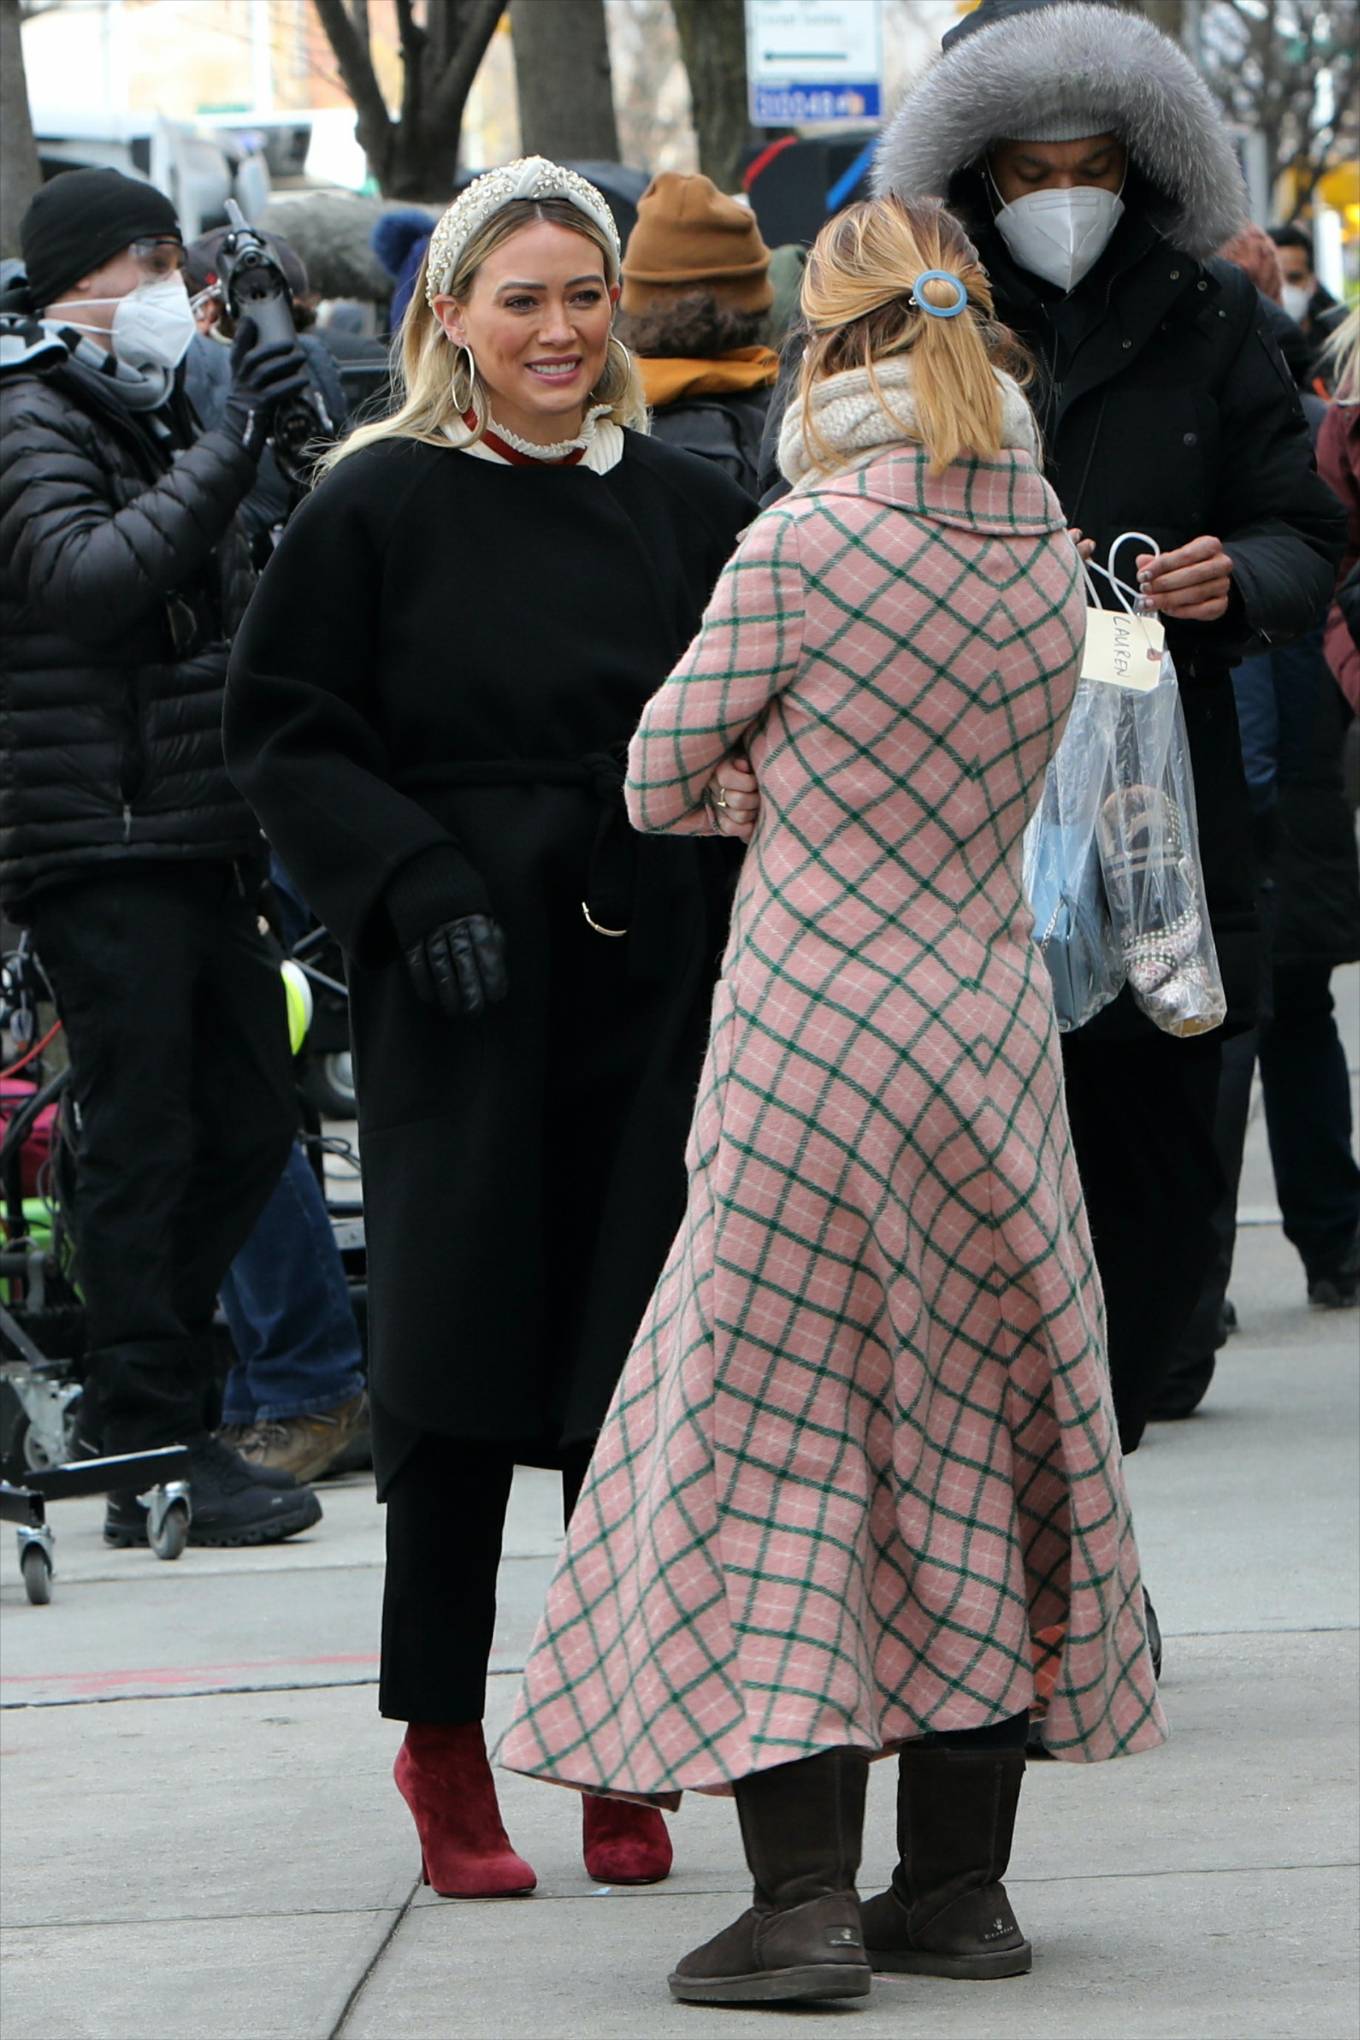 Hilary Duff - With Molly Bernard filming 'Younger' in Downtown